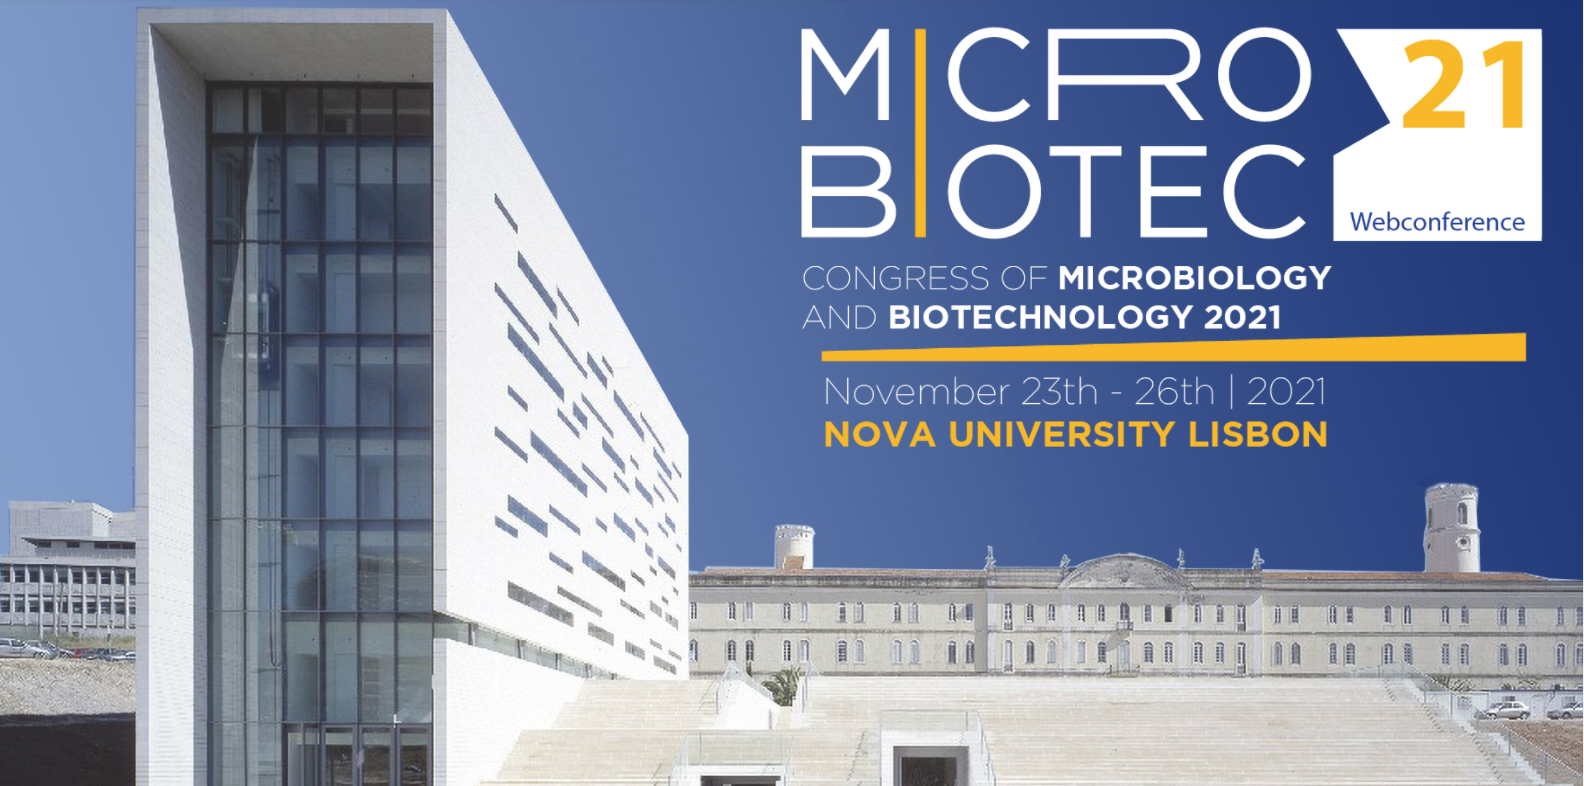 MICROBIOTEC’21 - Microbiology and Biotechnology Congress